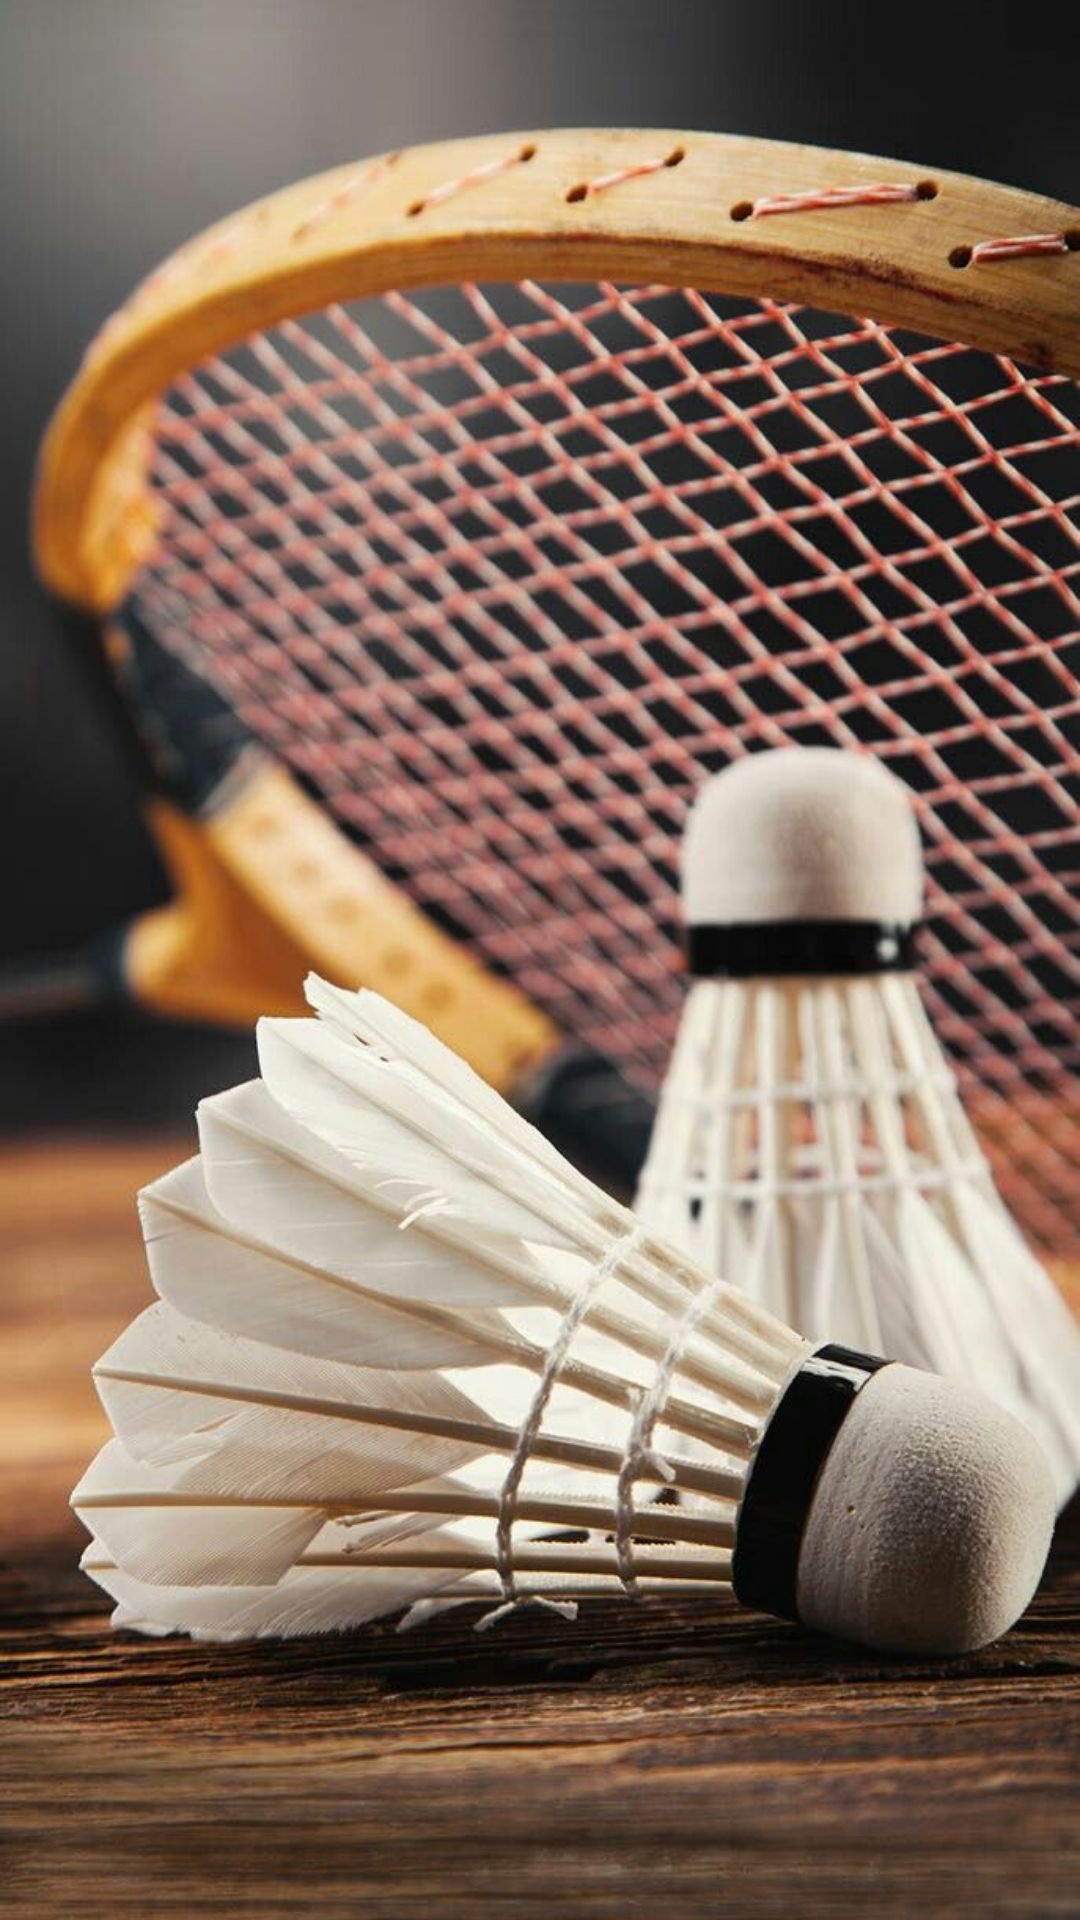 Free badminton wallpapers, Sporting excellence, Athletes in action, Inspiring images, 1080x1920 Full HD Phone